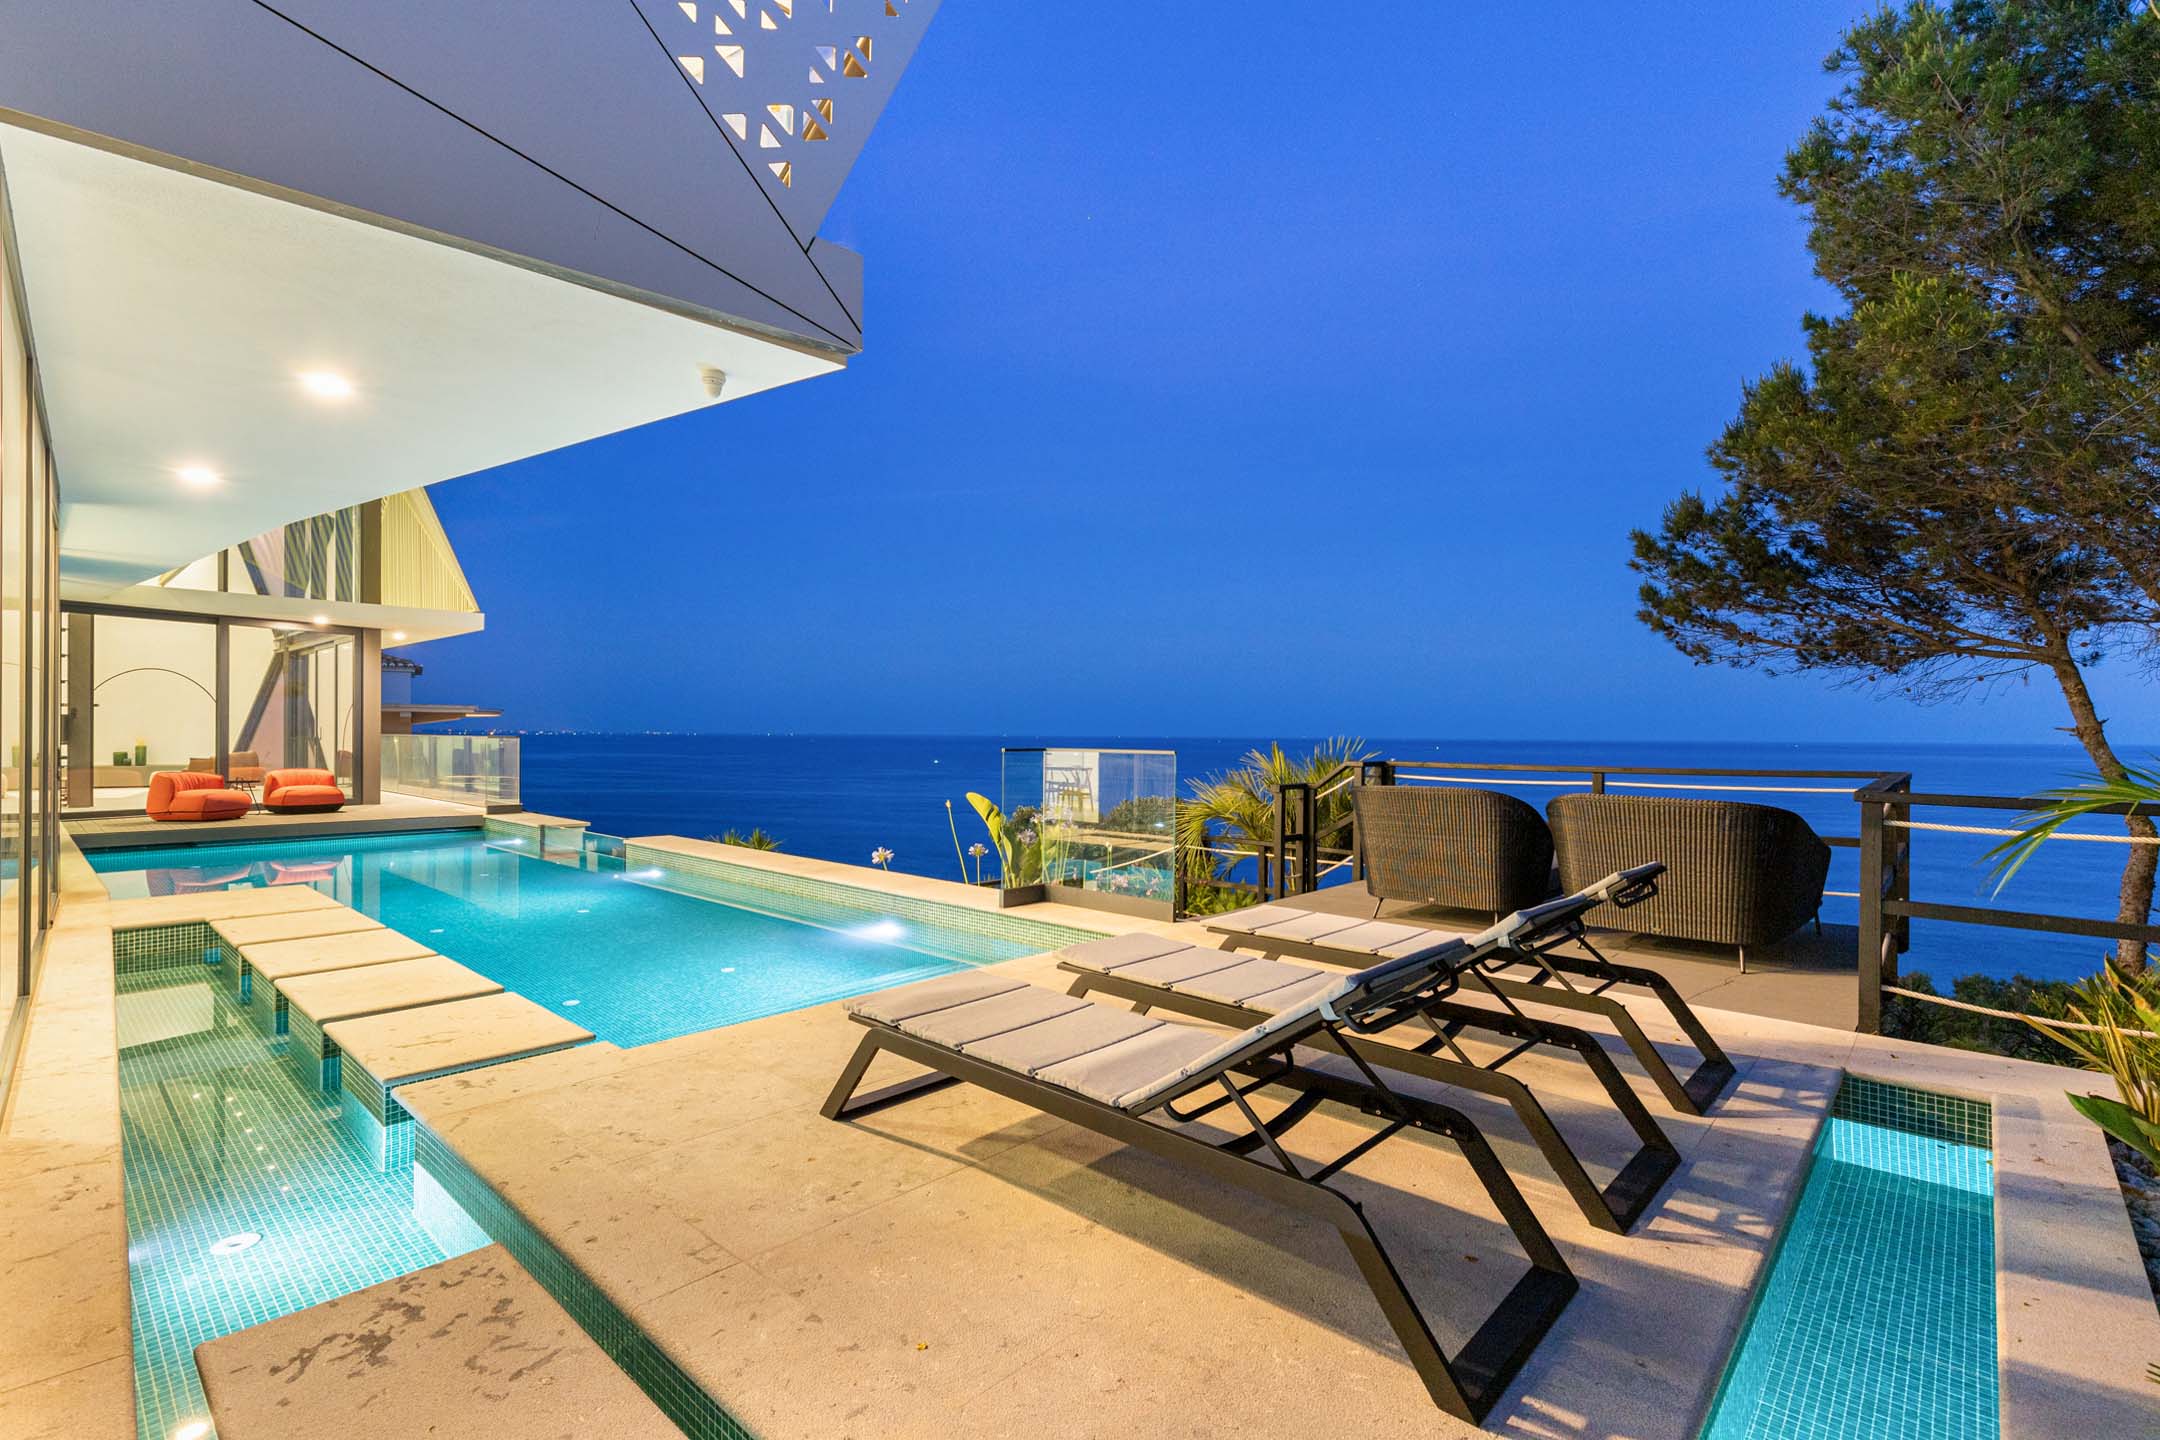 ALBUFEIRA – Exceptional waterfront villa for sale, an new architectural masterpiece in Portugal